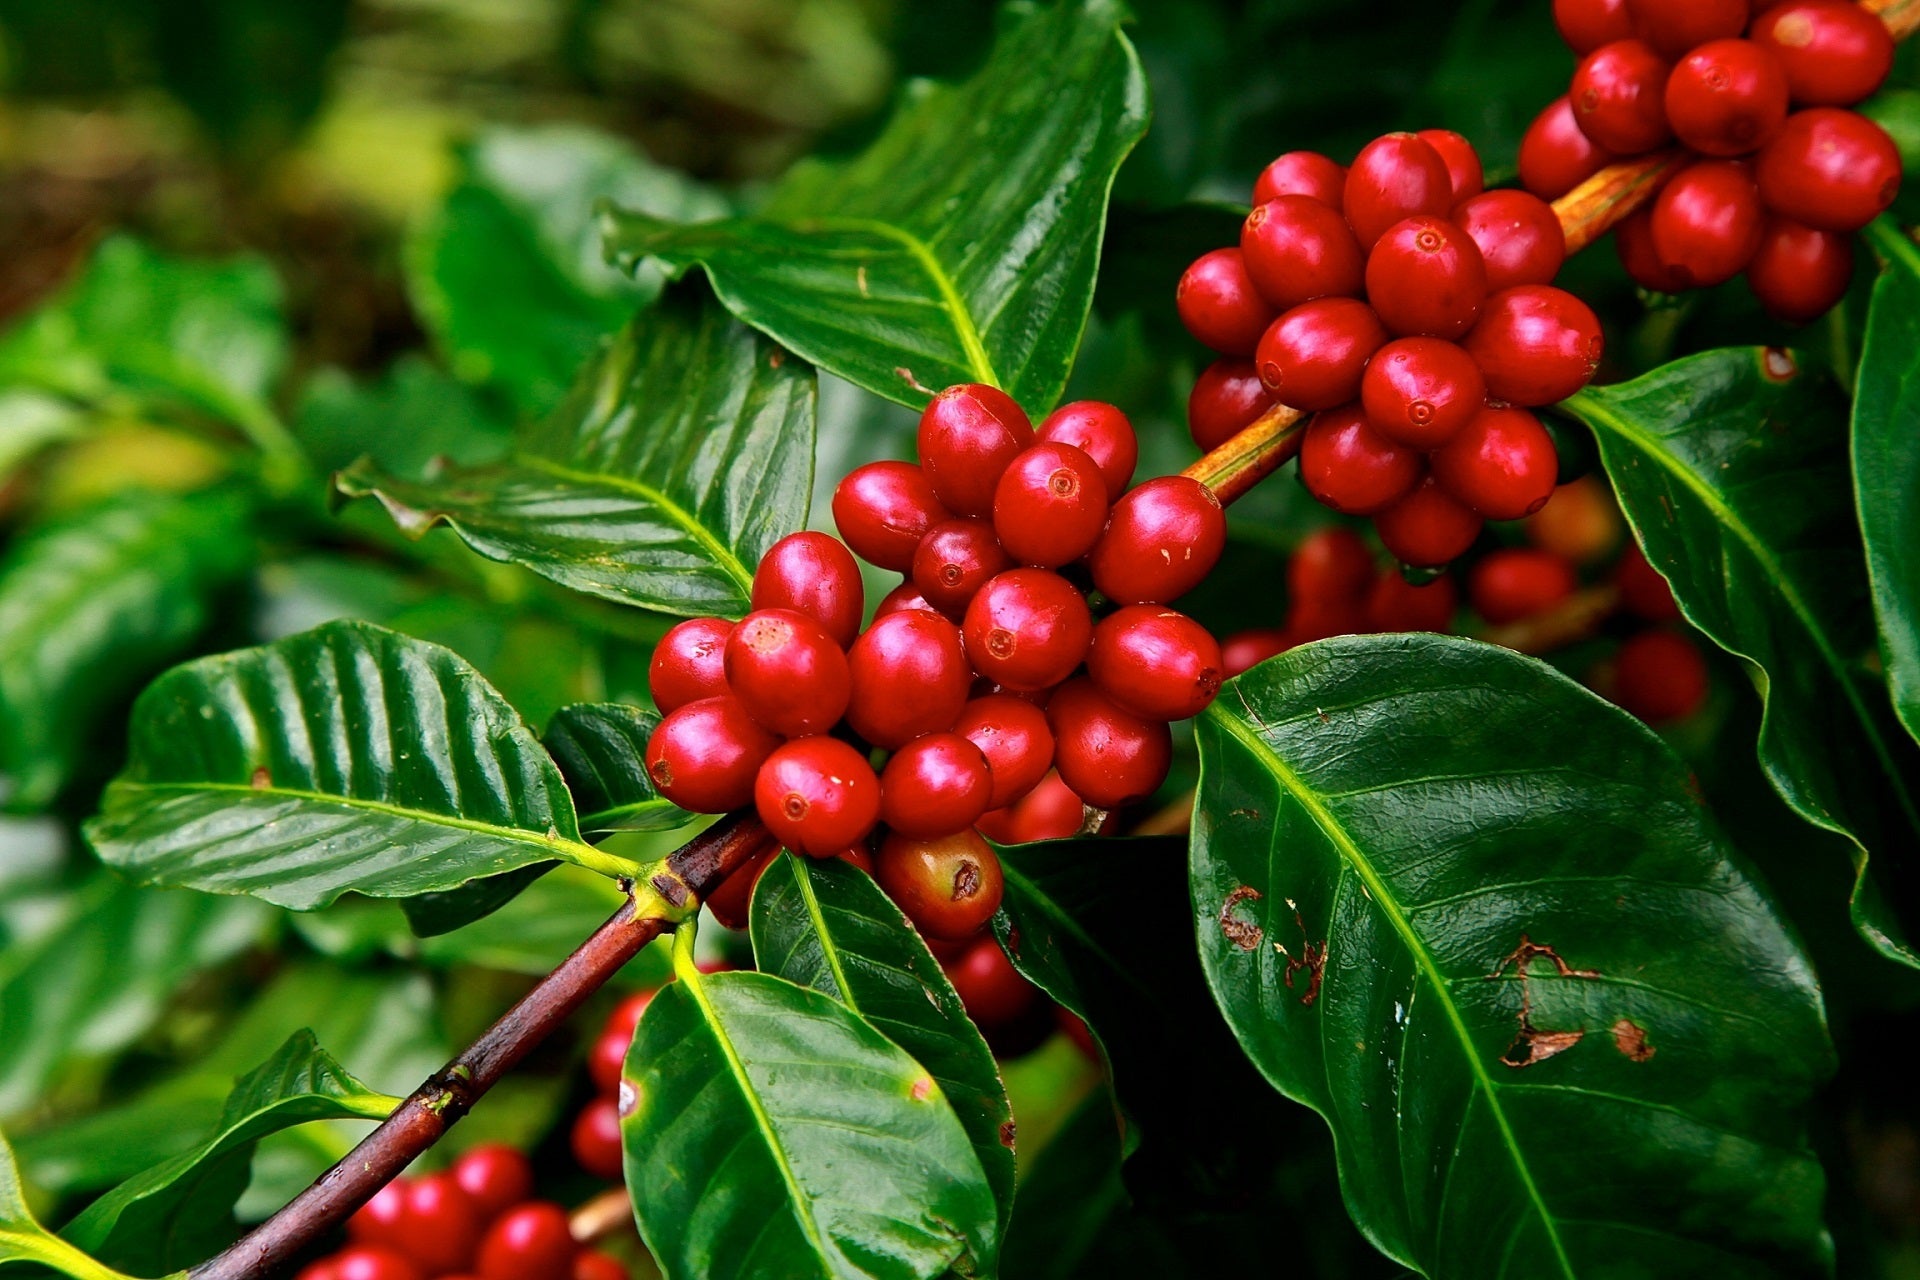 Coffee cherries contain the coffee bean, which RISE Brewing Co roasts to make RISE nitro cold brew coffee in a can and in a keg